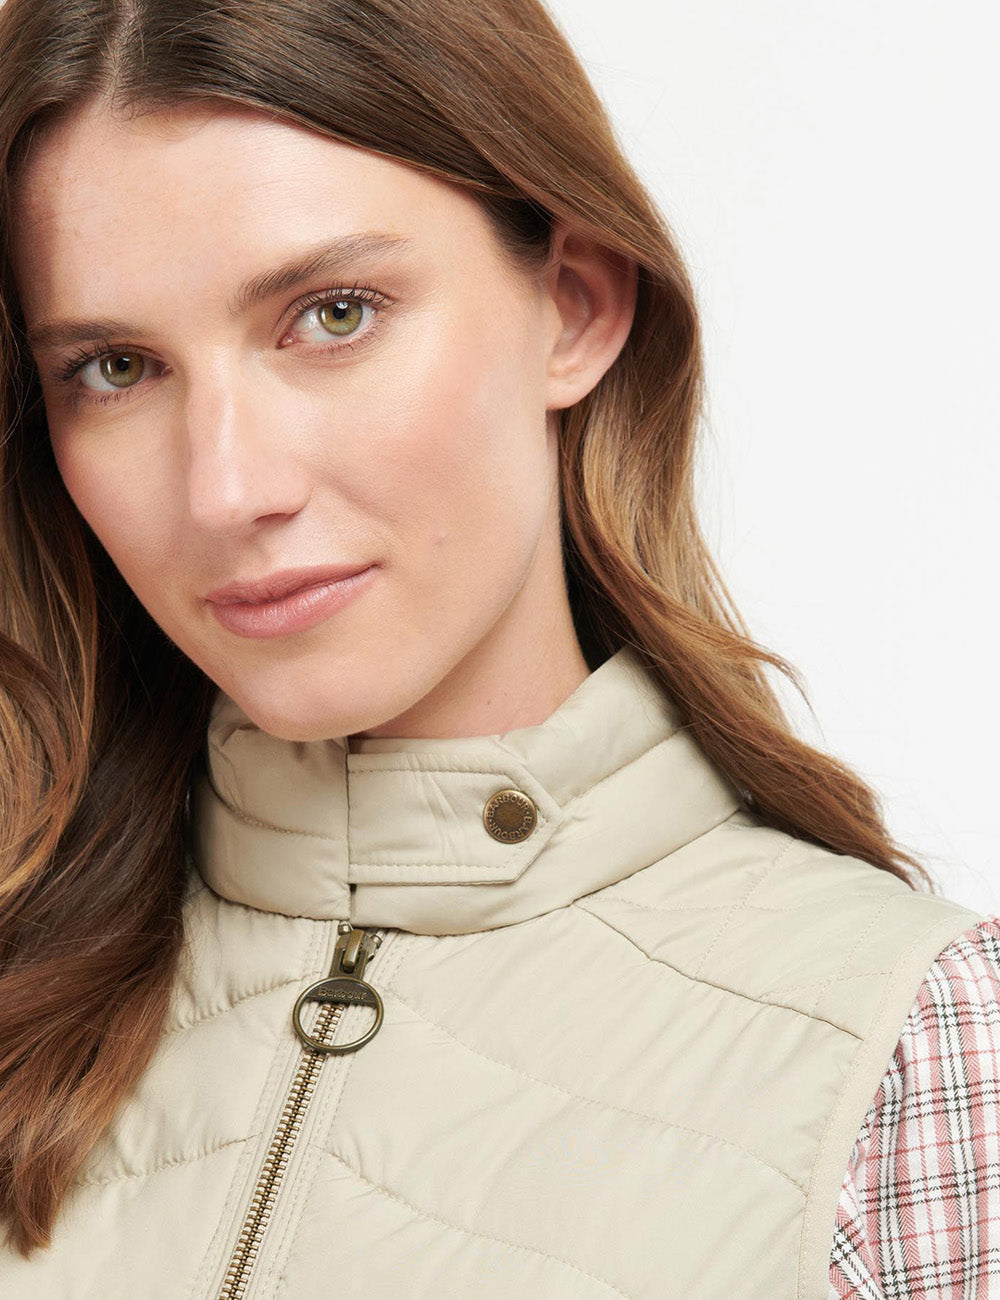 Close up of woman wearing the Gilet, focusing on the neckline